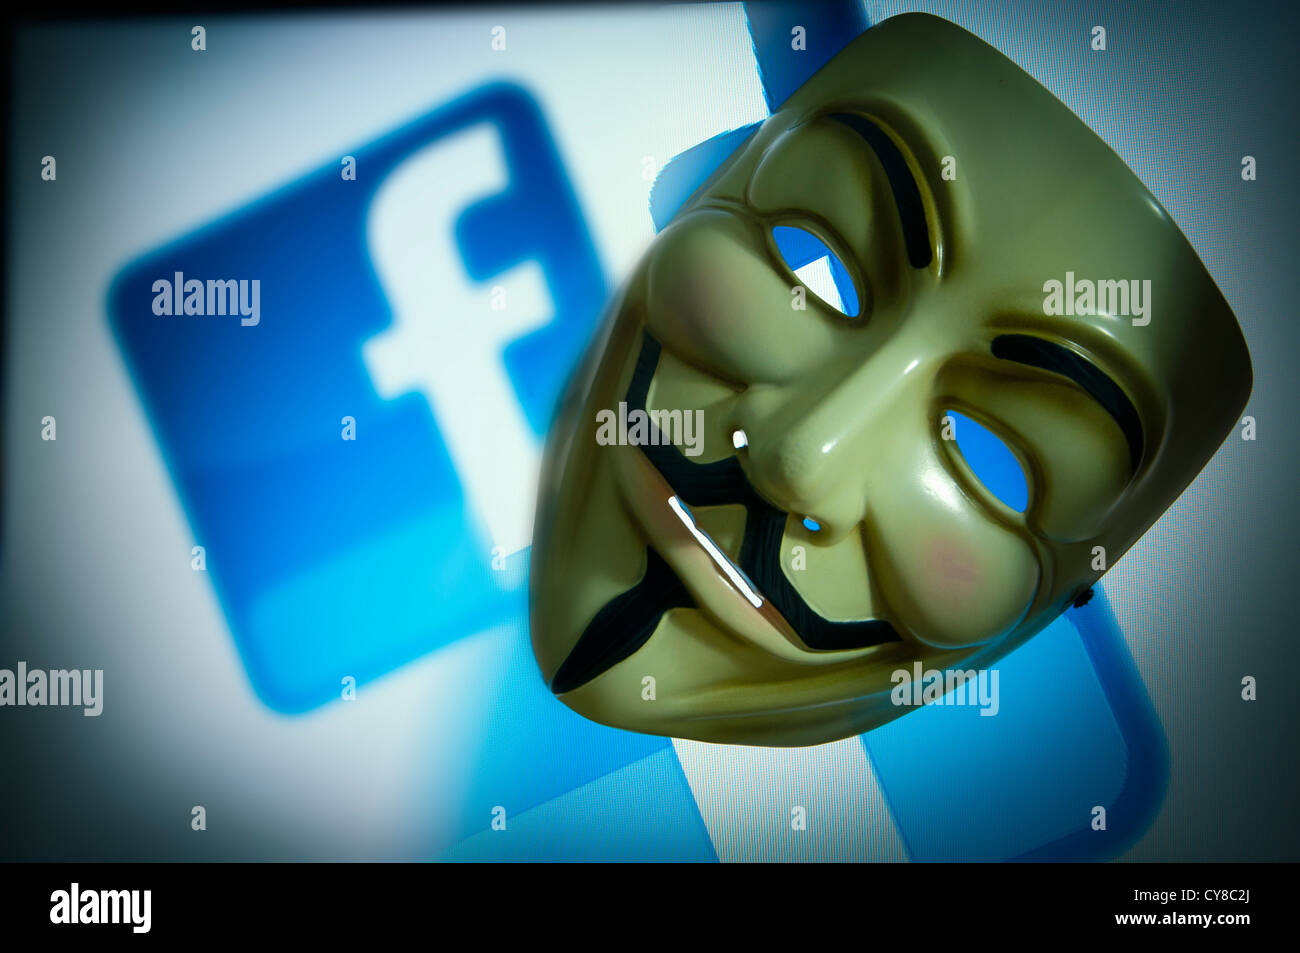 anonymous hacker facebook cover